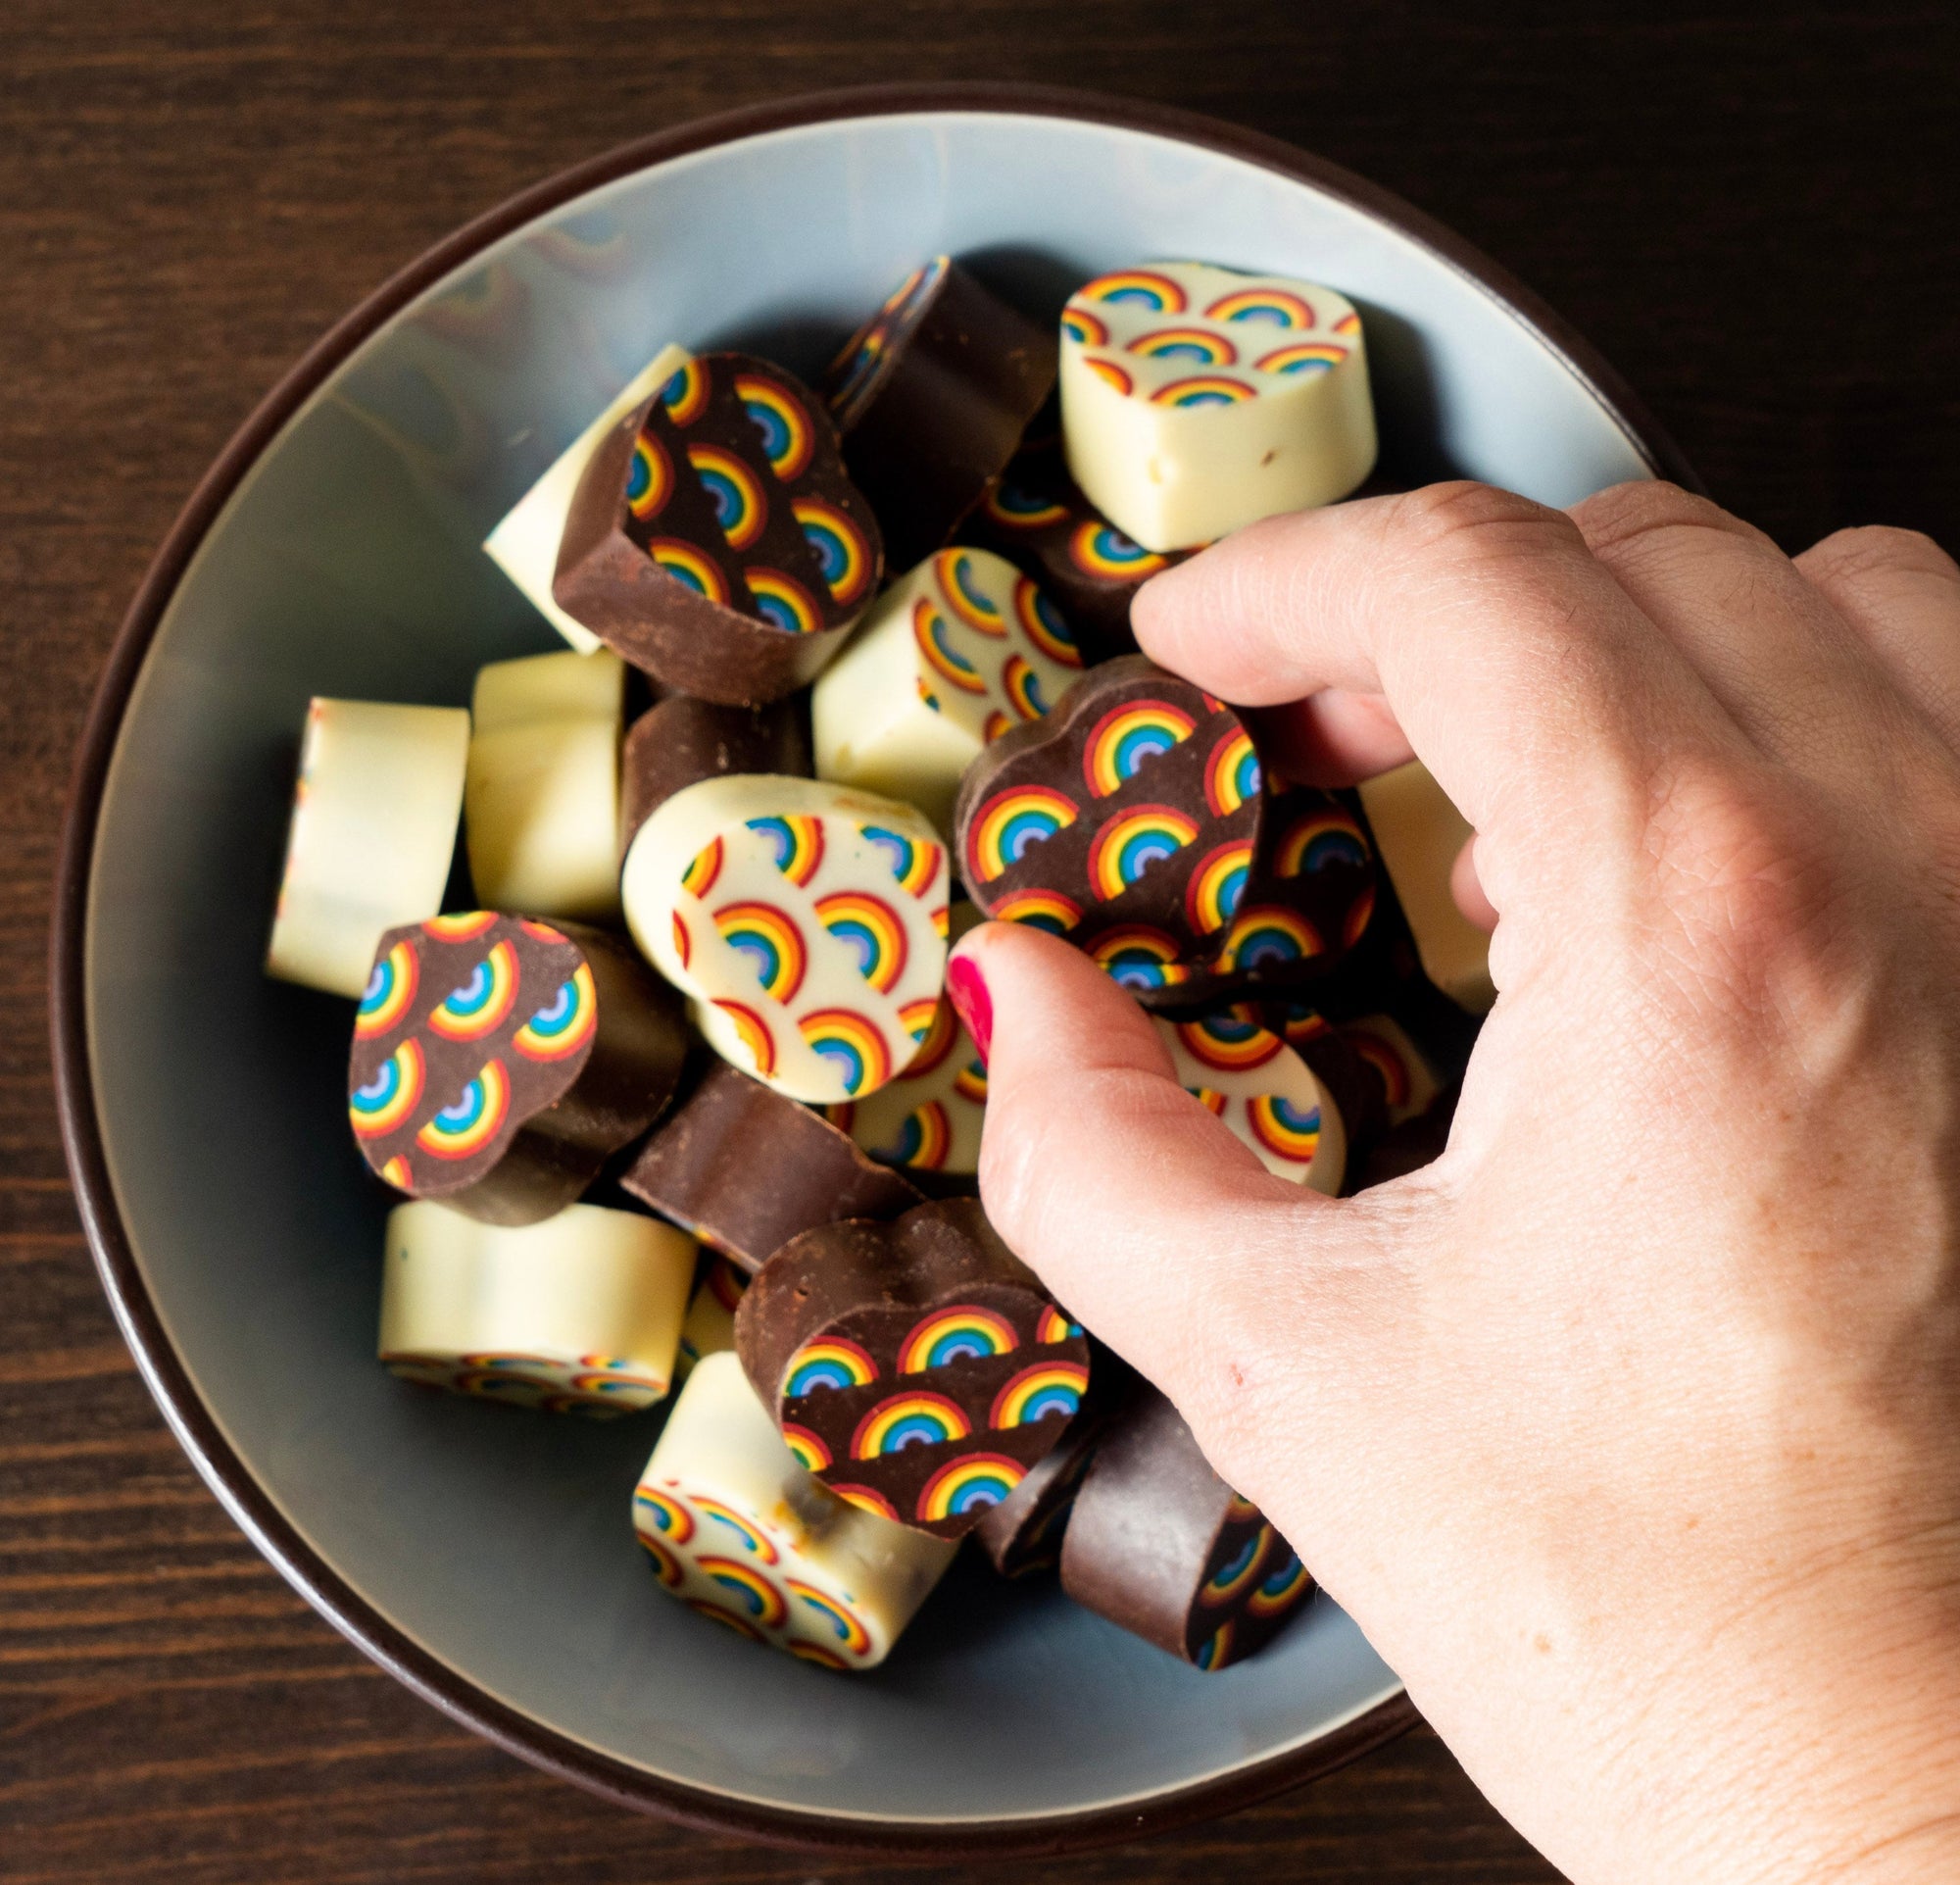 Rainbow Bonbons: Dark &amp; White Chocolate with Dulce de Leche Wooden Table Baking Co.